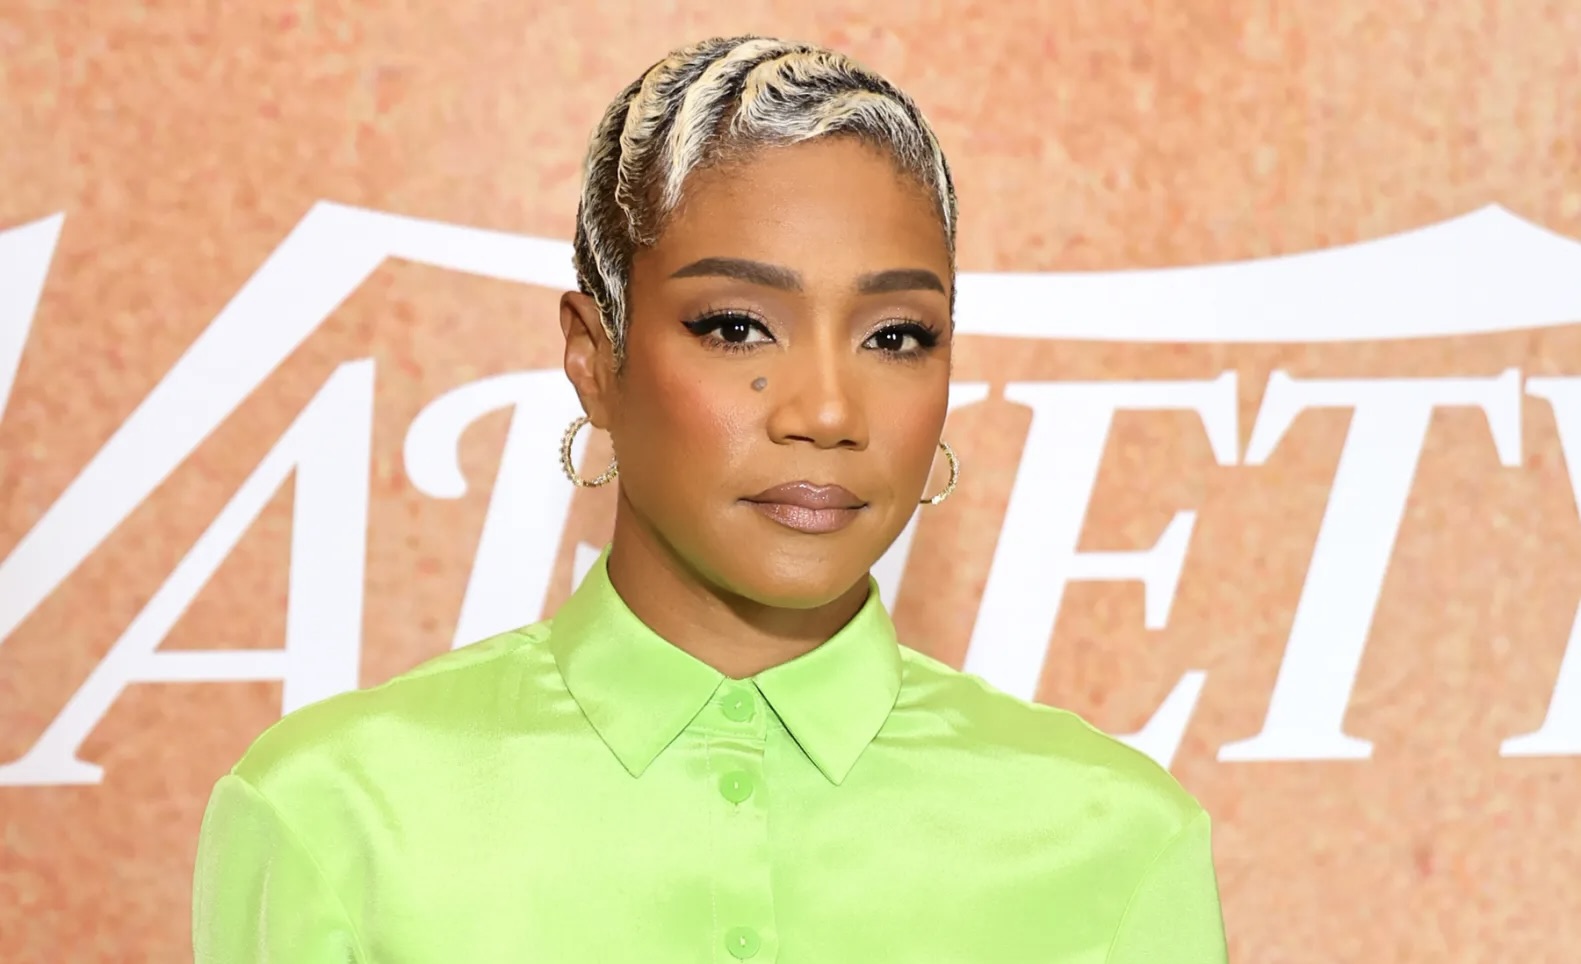 Tiffany Haddish Gets Beverly Hills DUI Charges Dropped, Pleads to Reckless Driving Instead